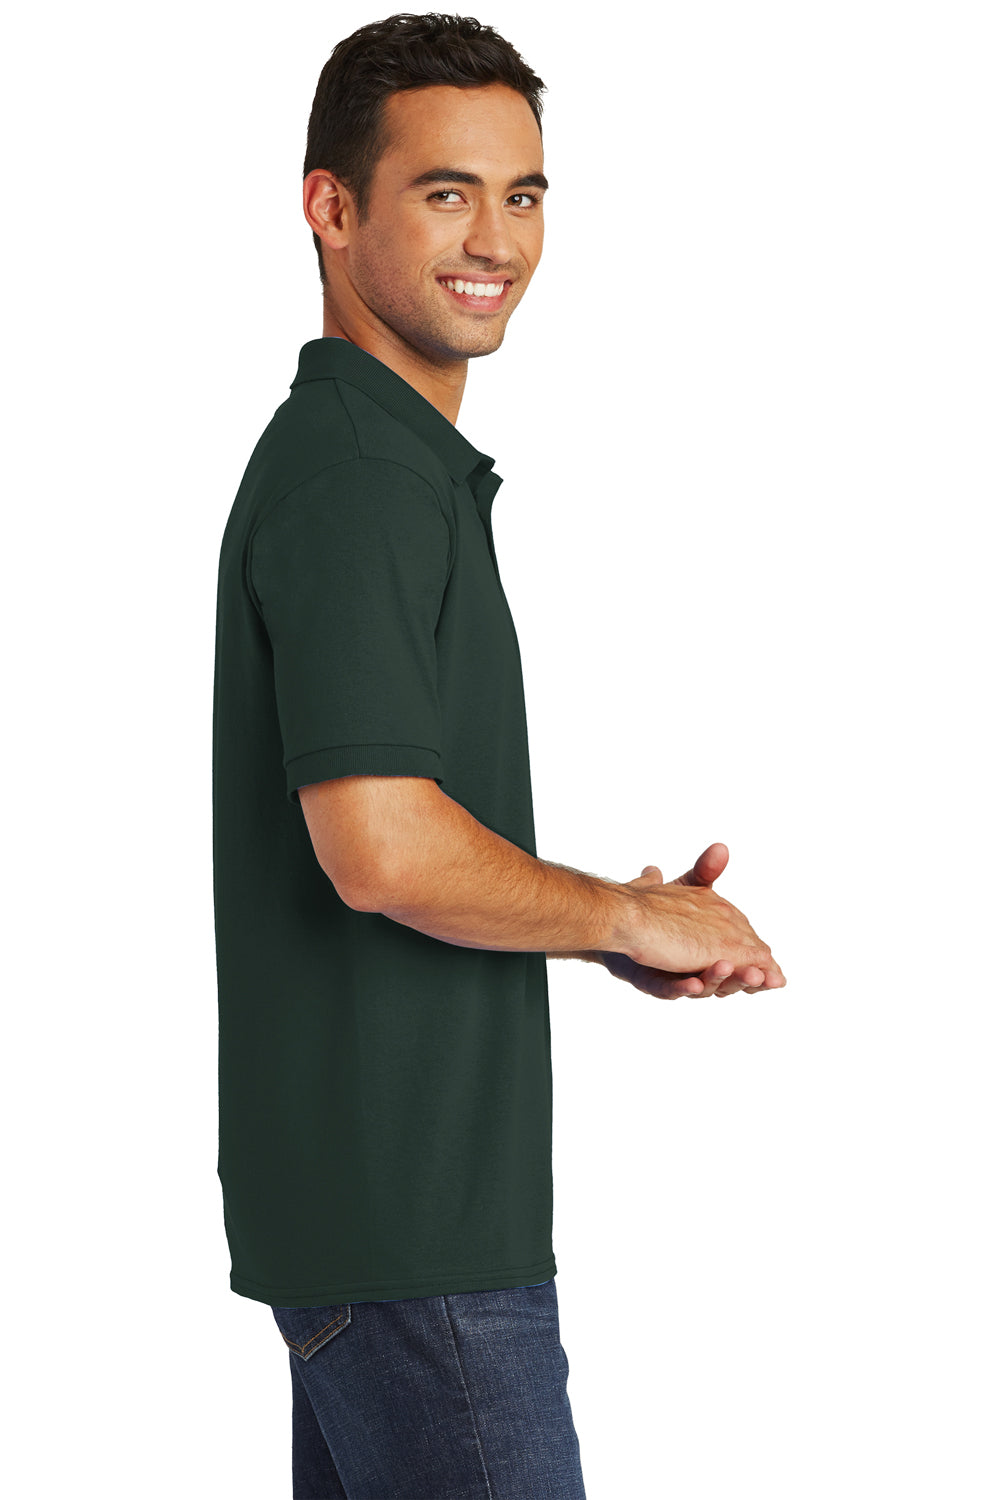 Port & Company KP55 Mens Core Stain Resistant Short Sleeve Polo Shirt Dark Green Side